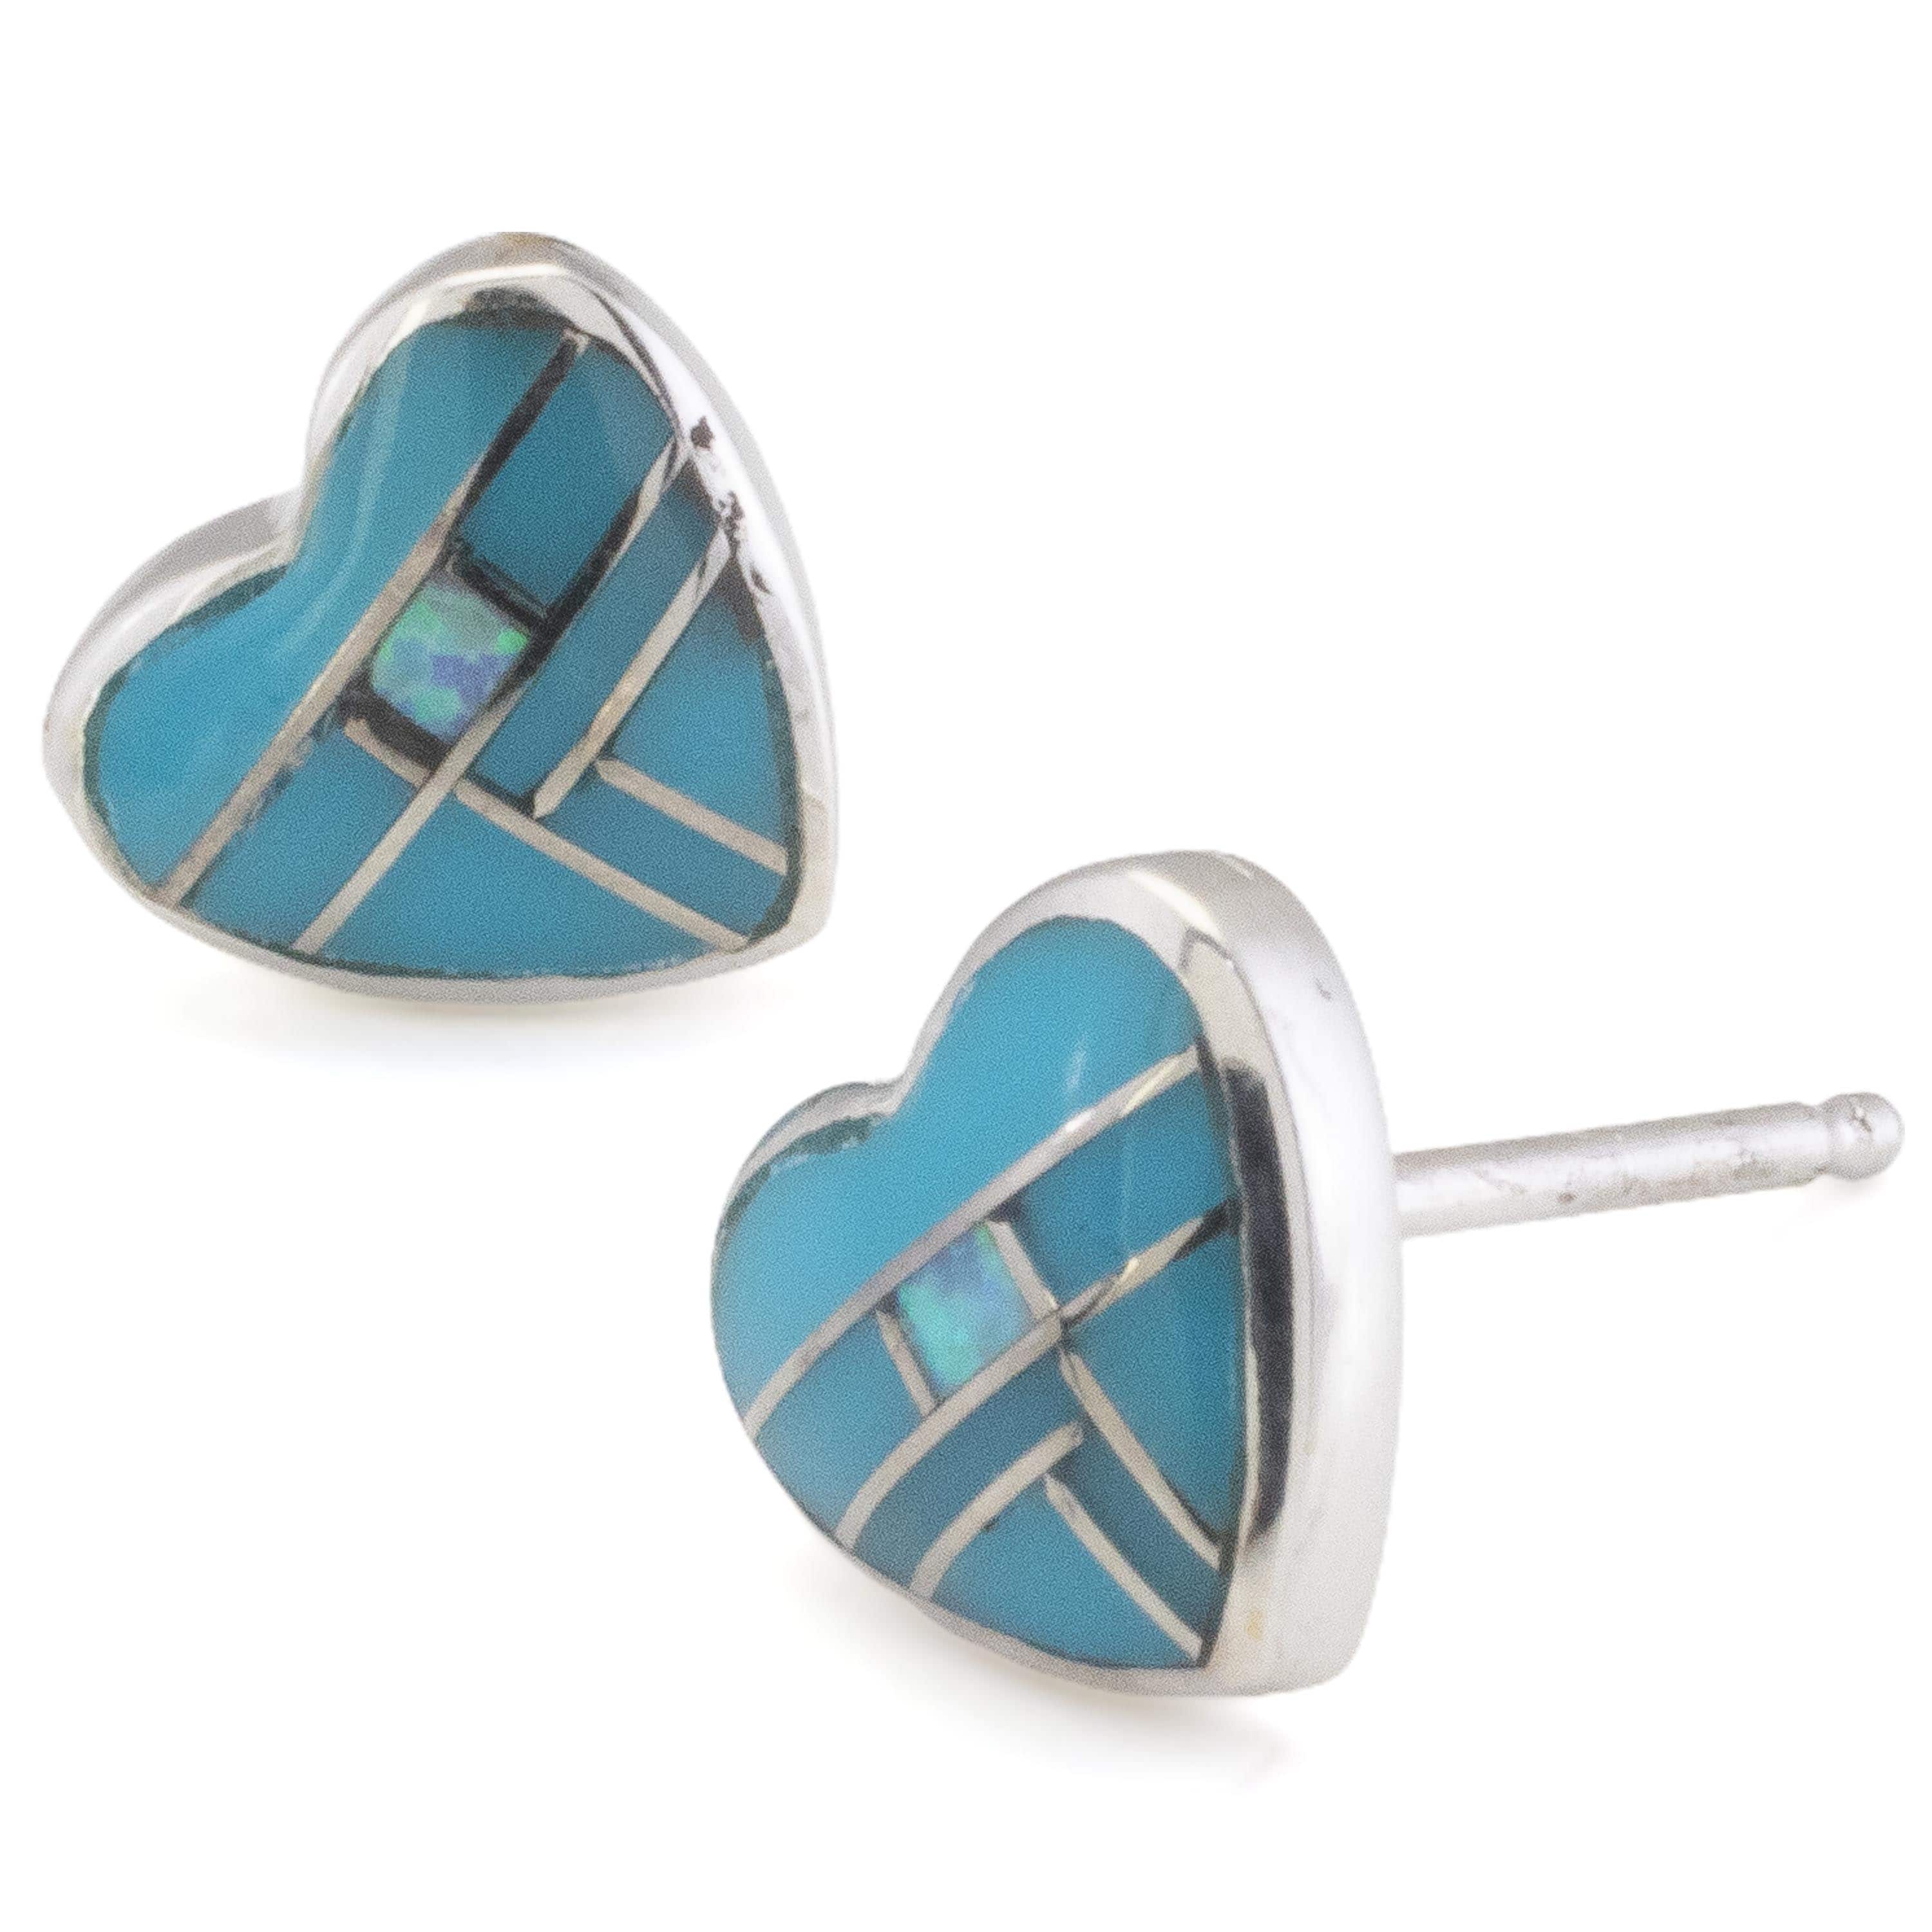 Kalifano Southwest Silver Jewelry Turquoise Heart 925 Sterling Silver Earring with Stud Backing USA Handmade with Opal Accent NME.2240.TQ